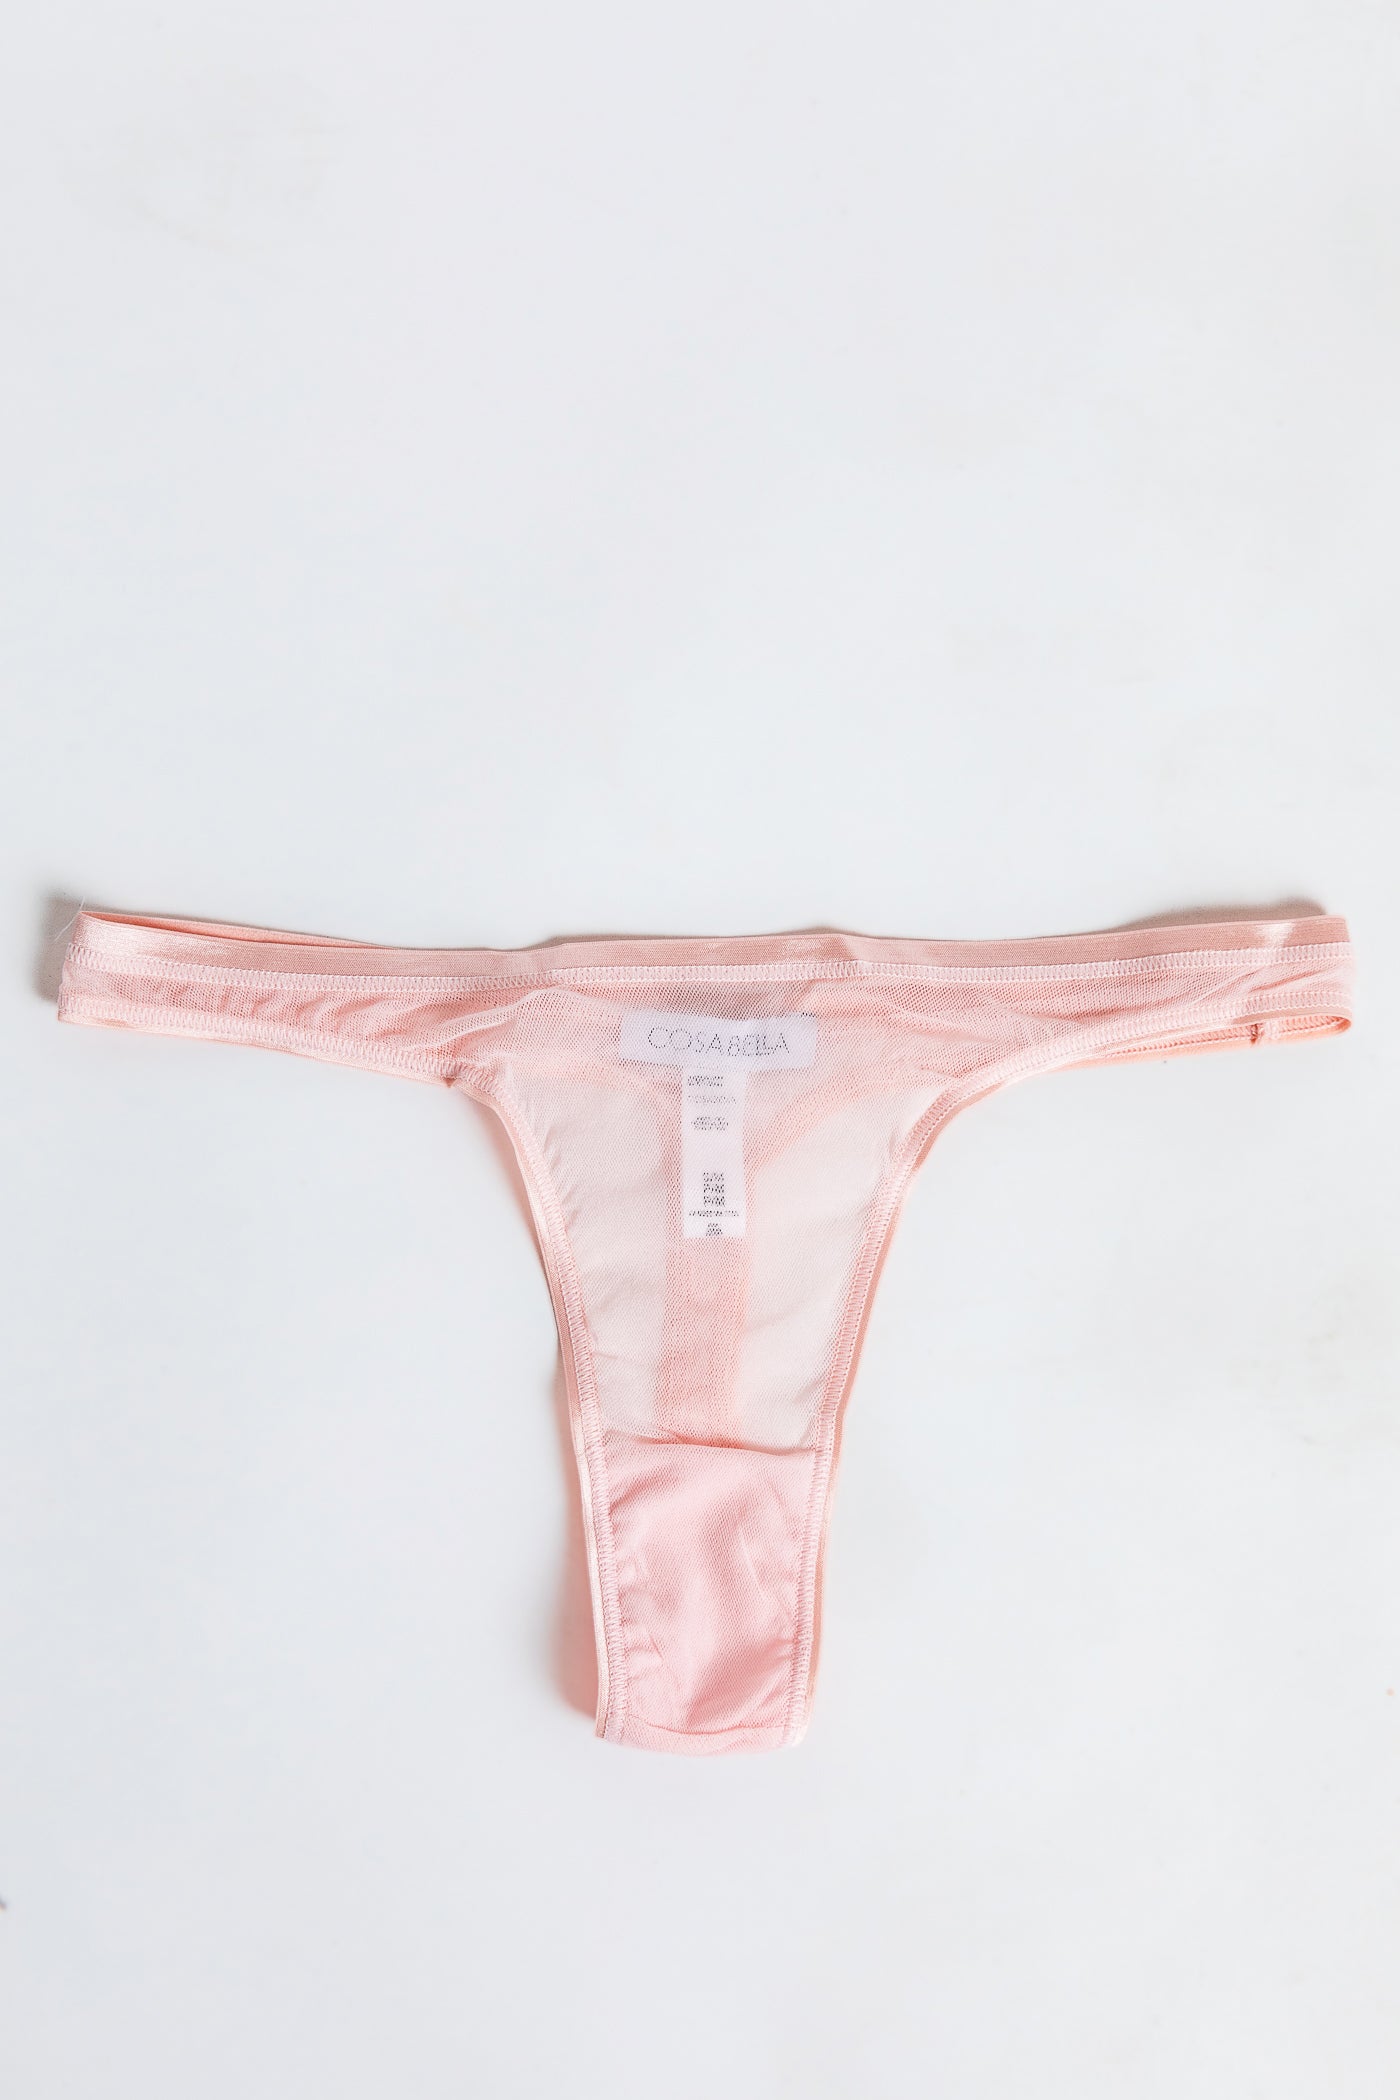 Cosabella Soire Confidence Thong